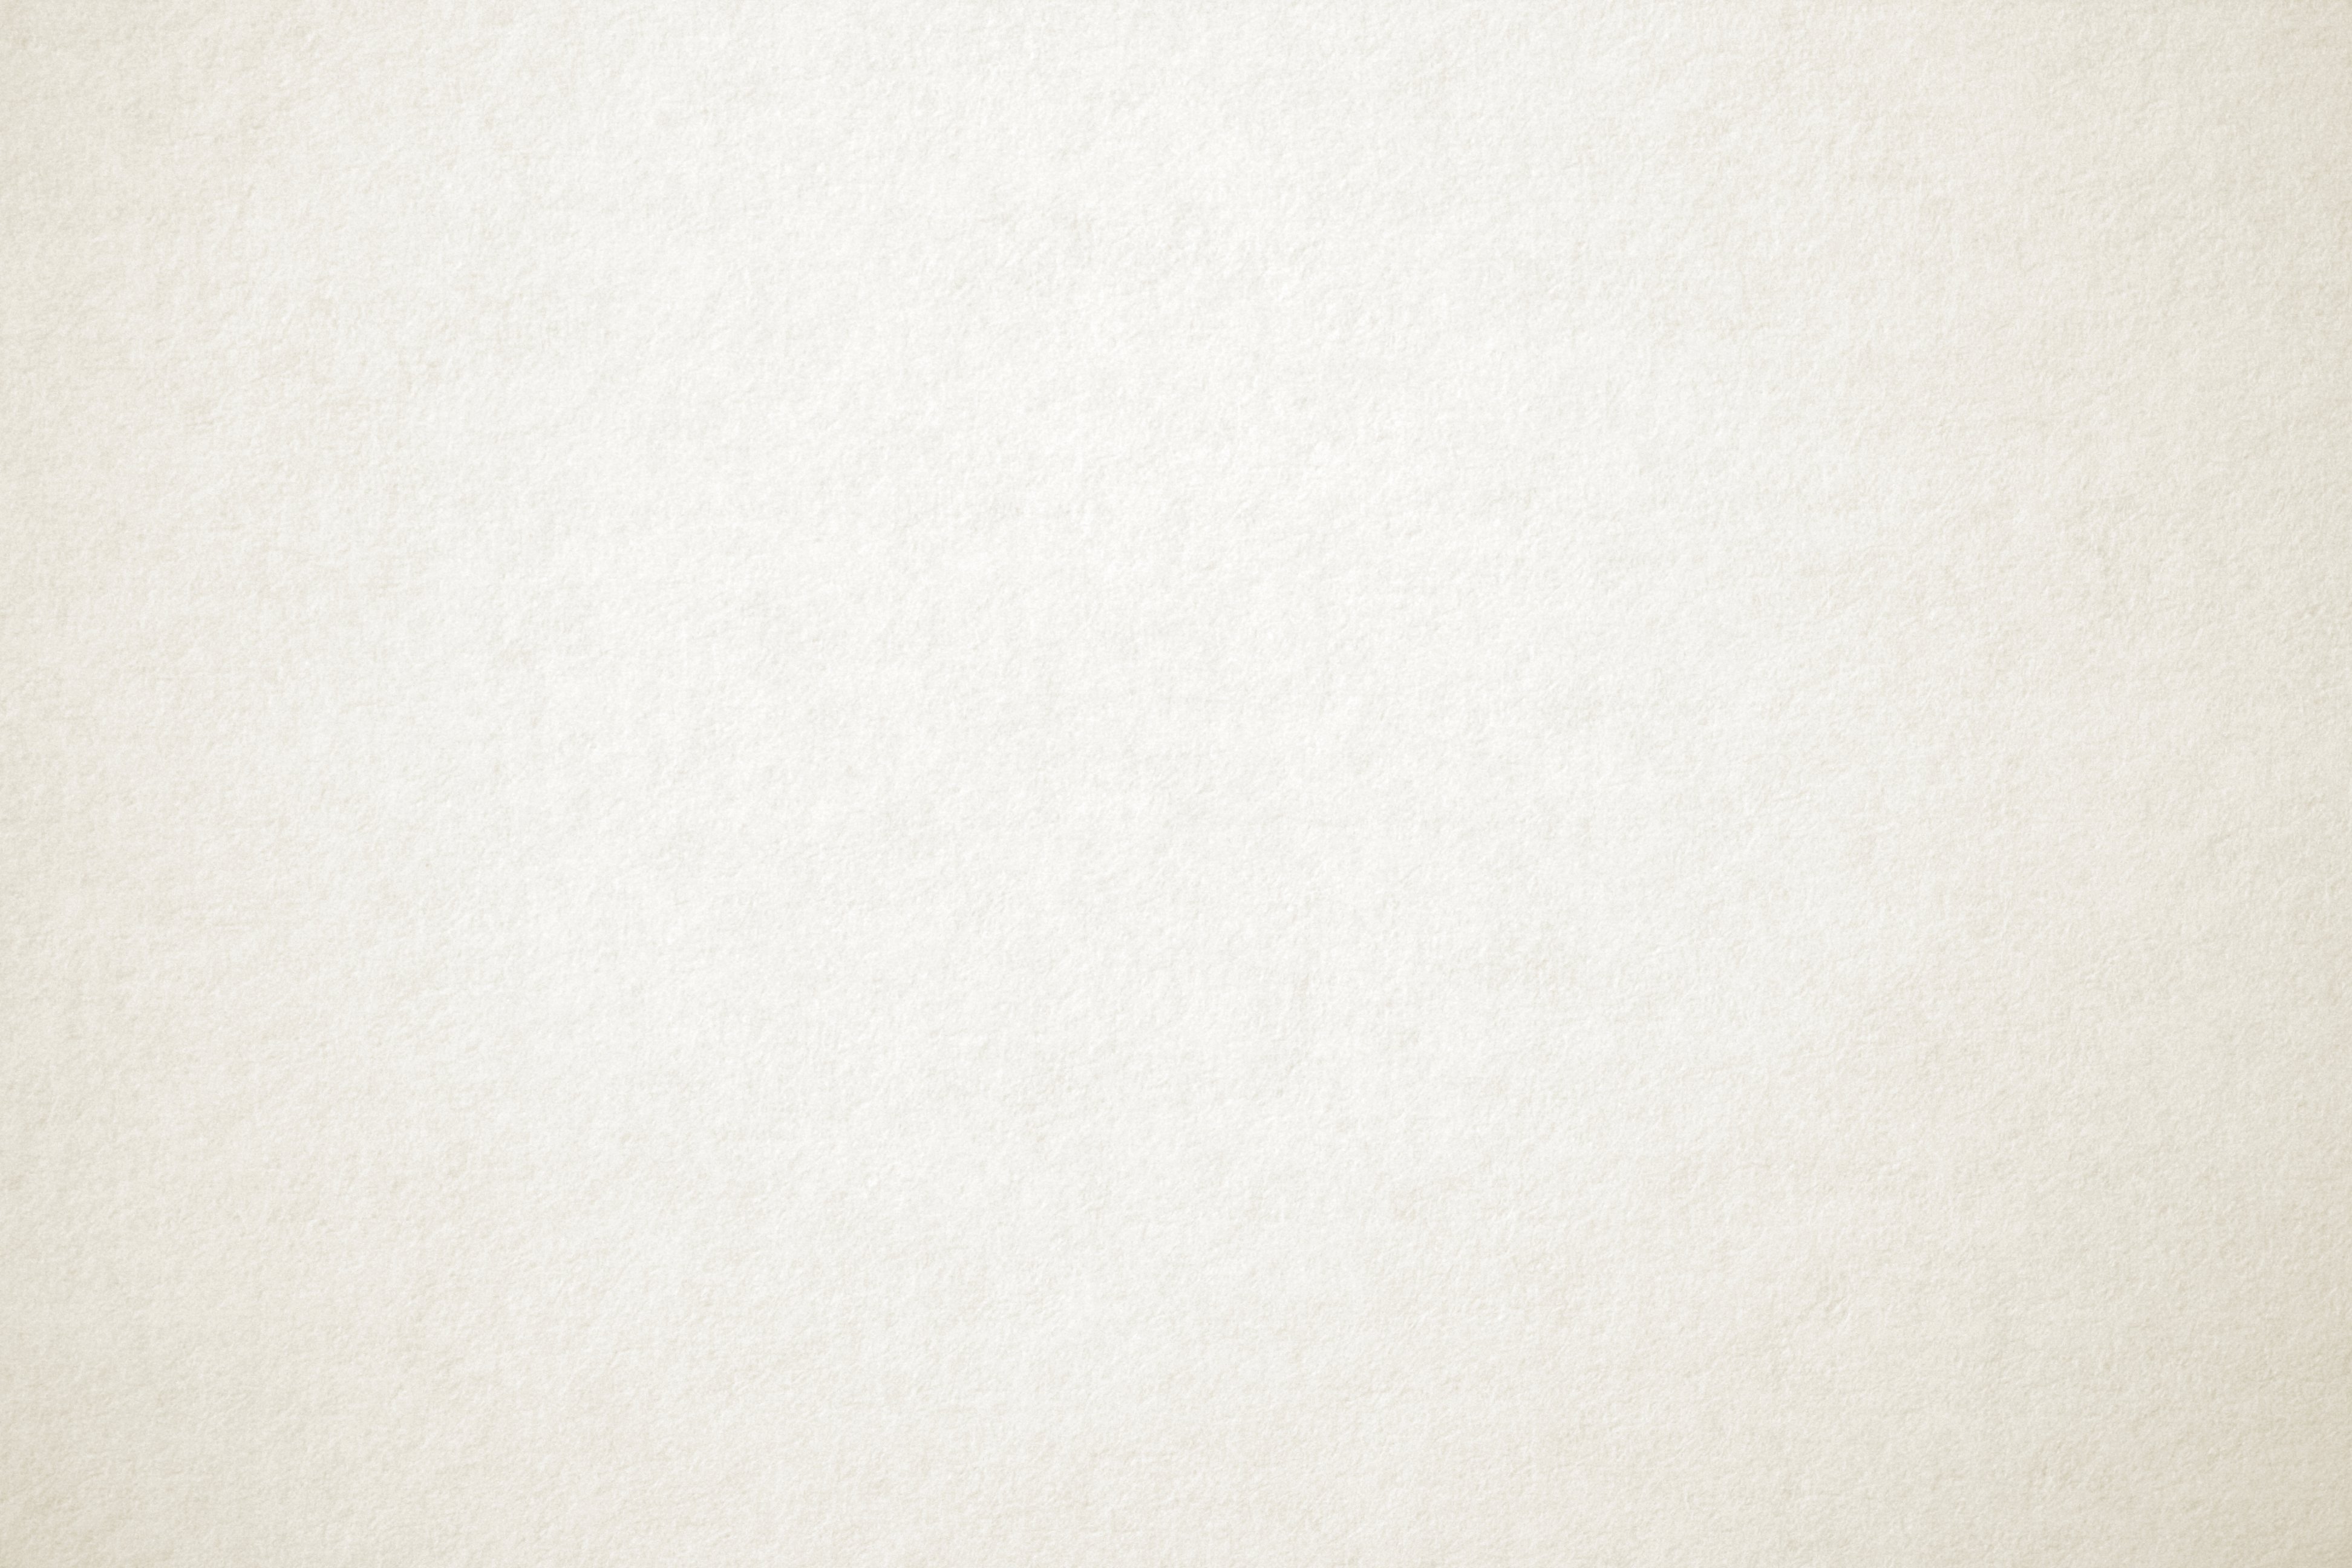 Ivory Off White Paper Texture Picture, Free Photograph